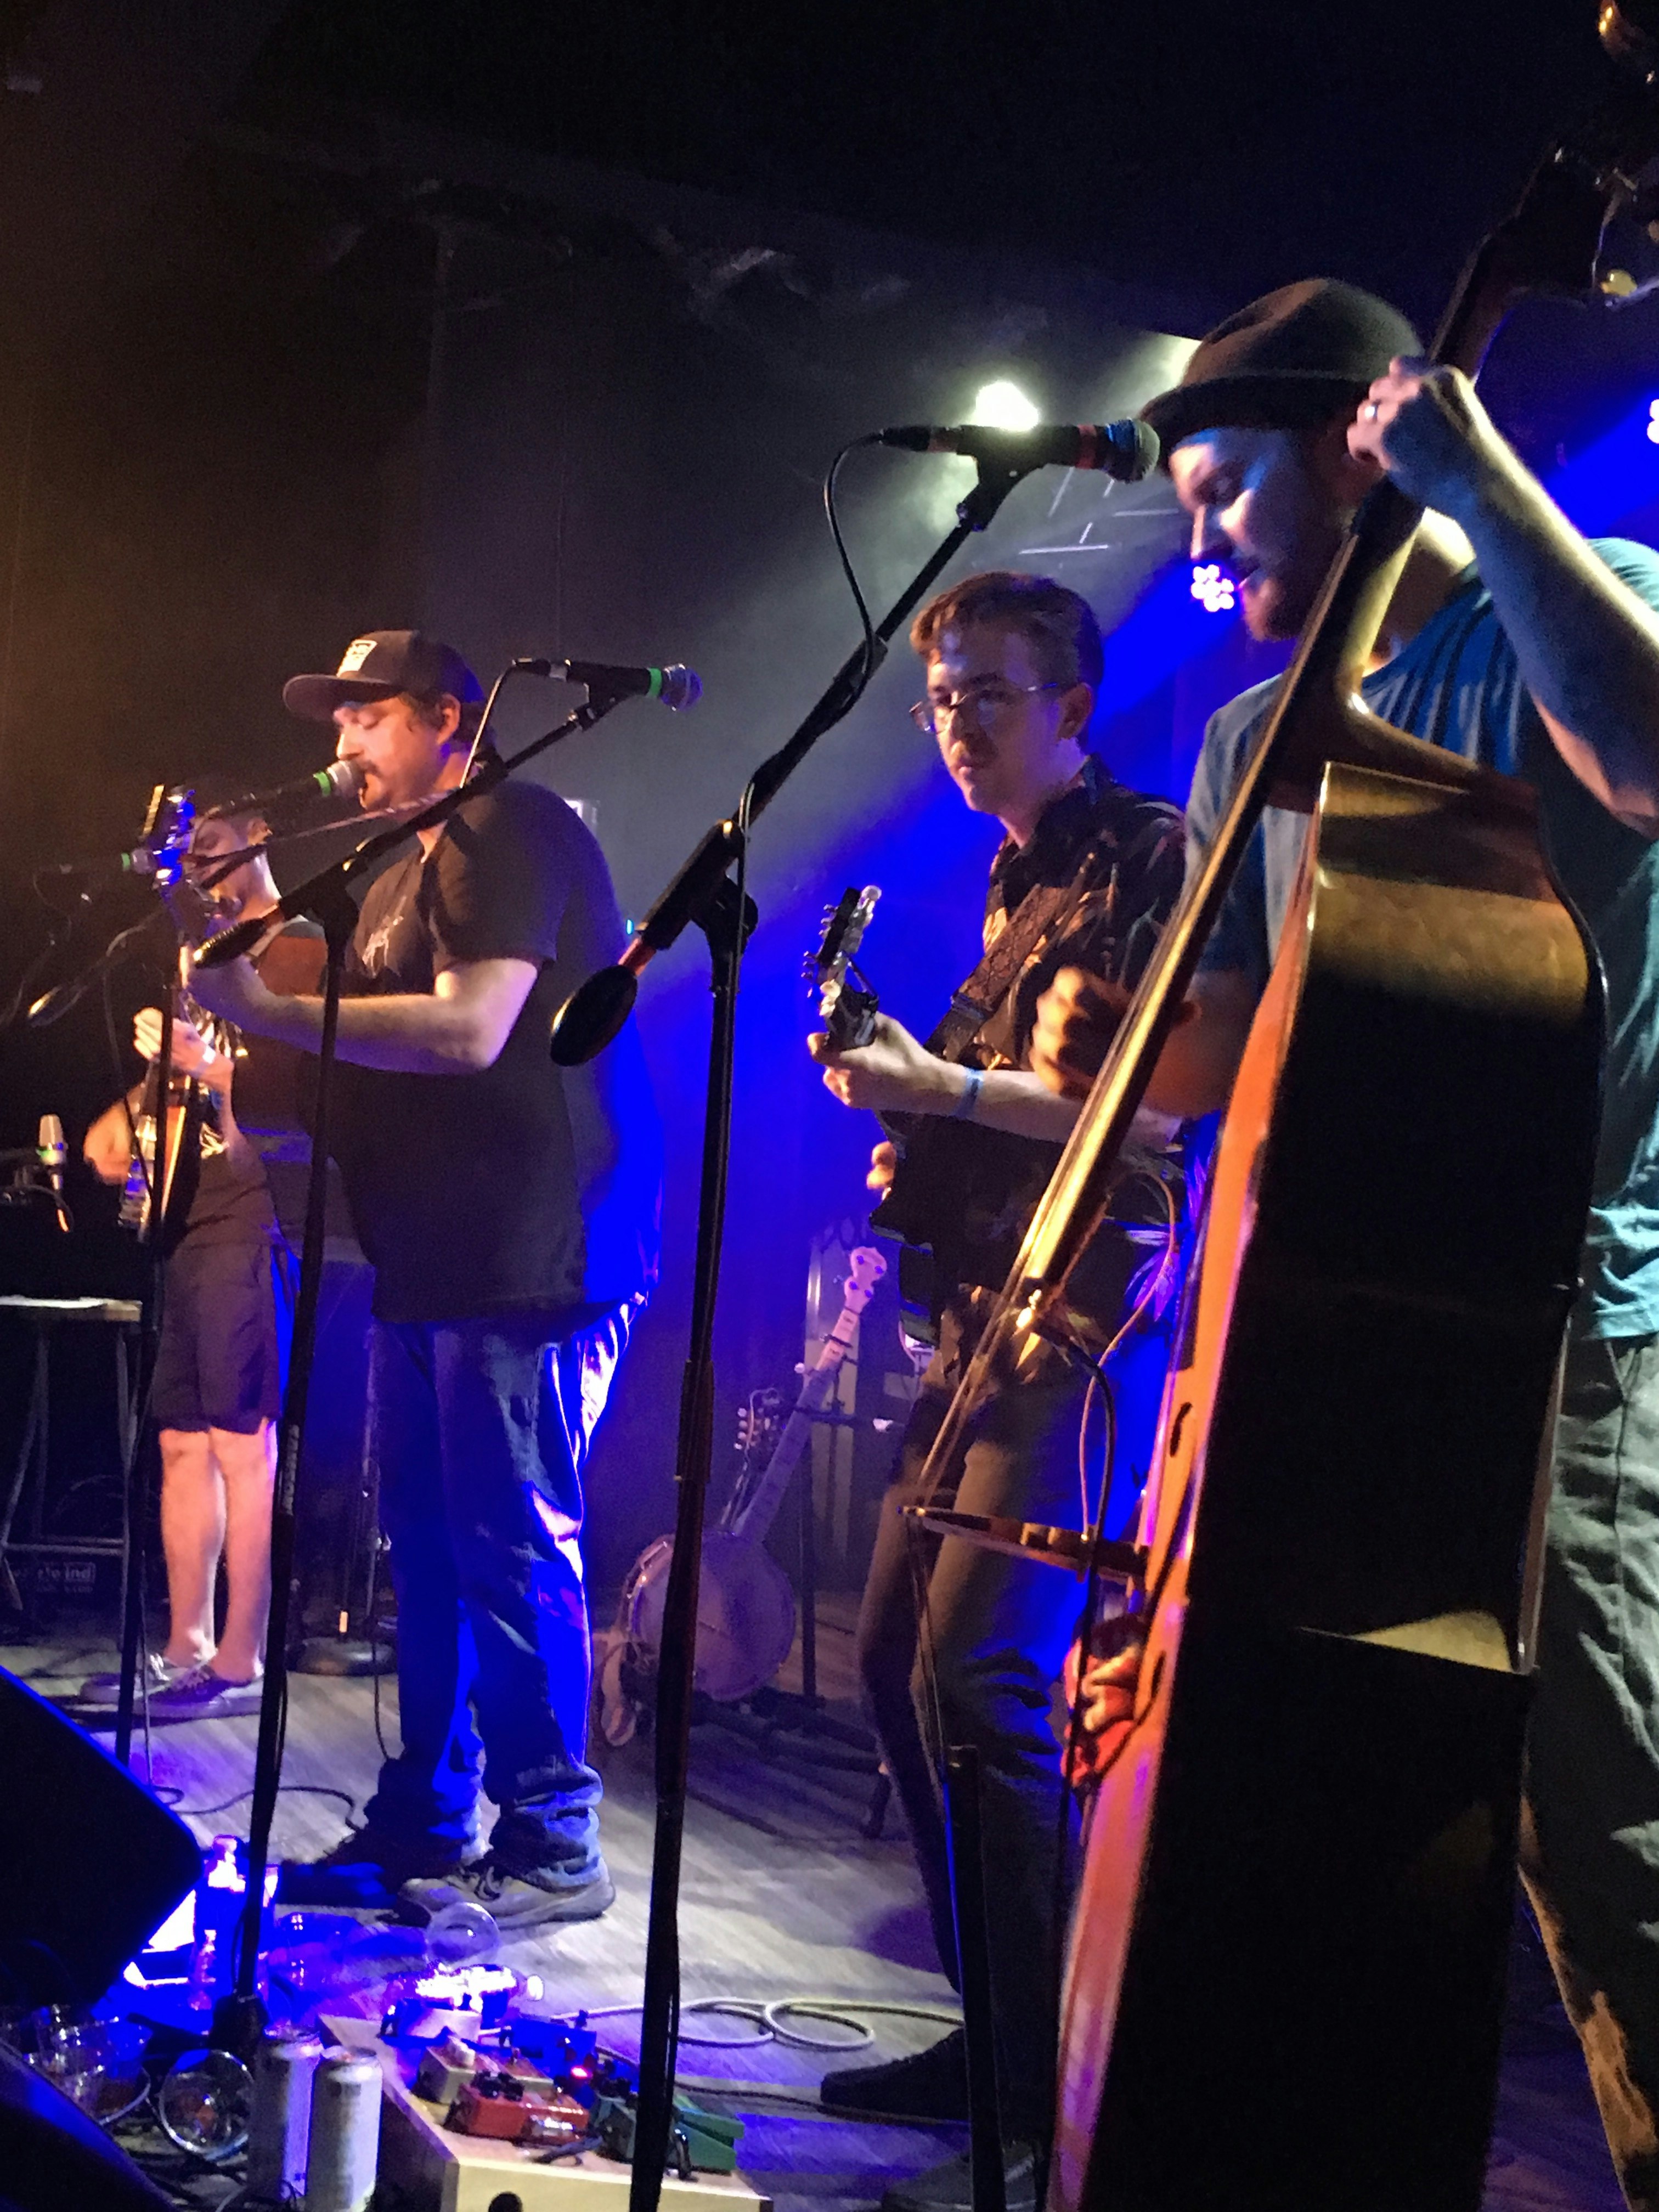 A group of musicians, each holding musical instruments perform on a stage at Hi-Fi. There man in the center wearing a black hat and shirt is singing into the microphone. 